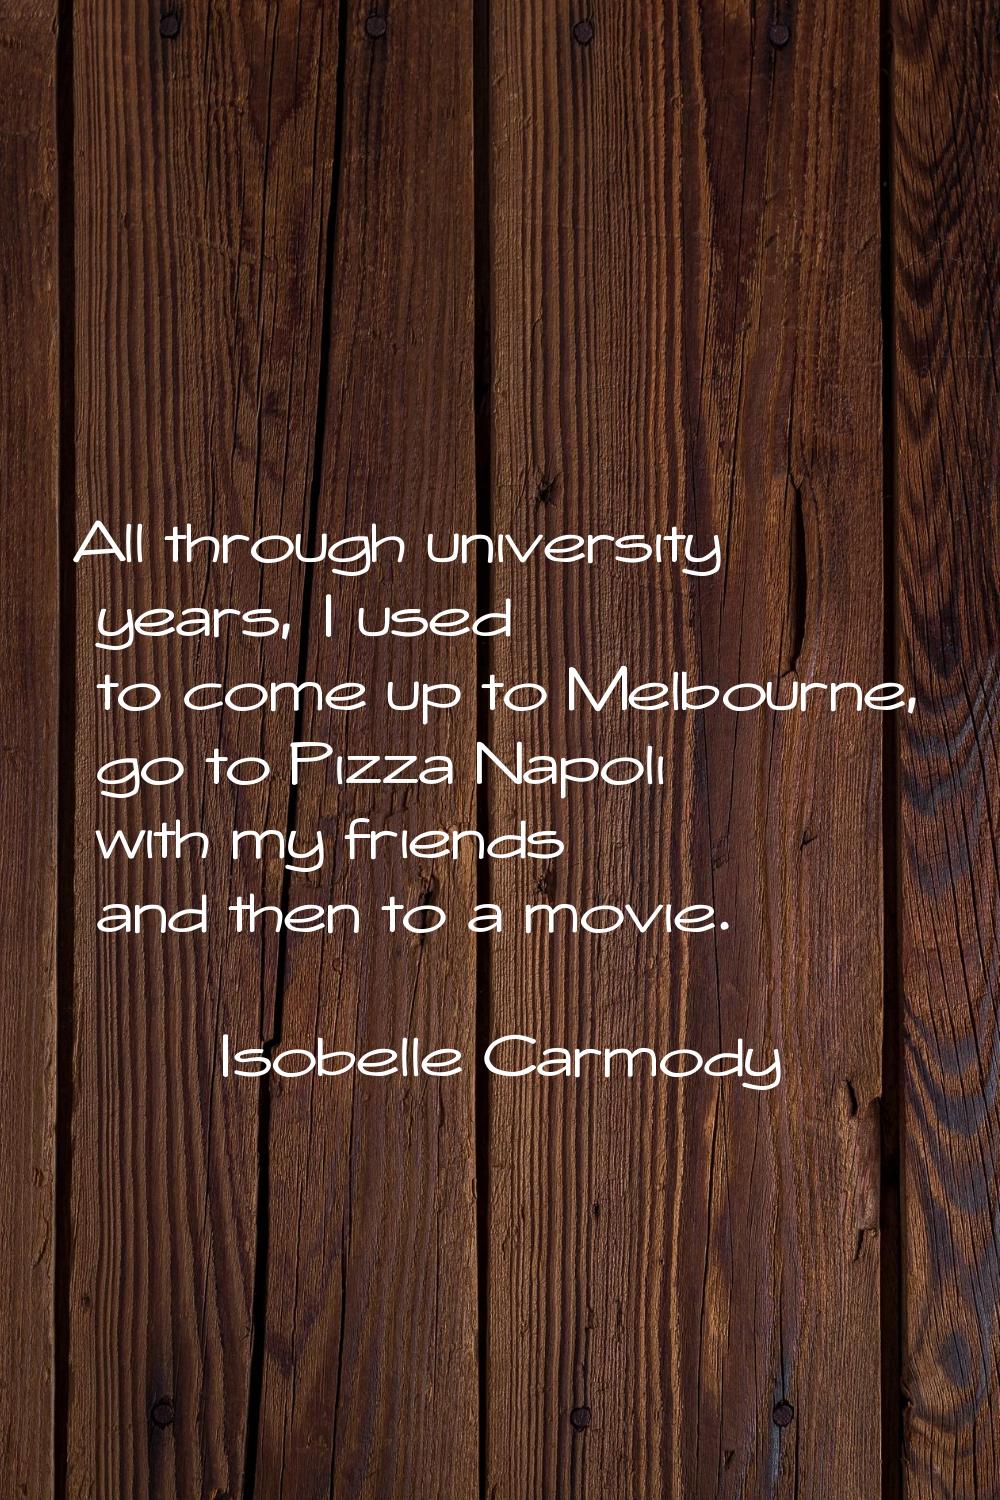 All through university years, I used to come up to Melbourne, go to Pizza Napoli with my friends an